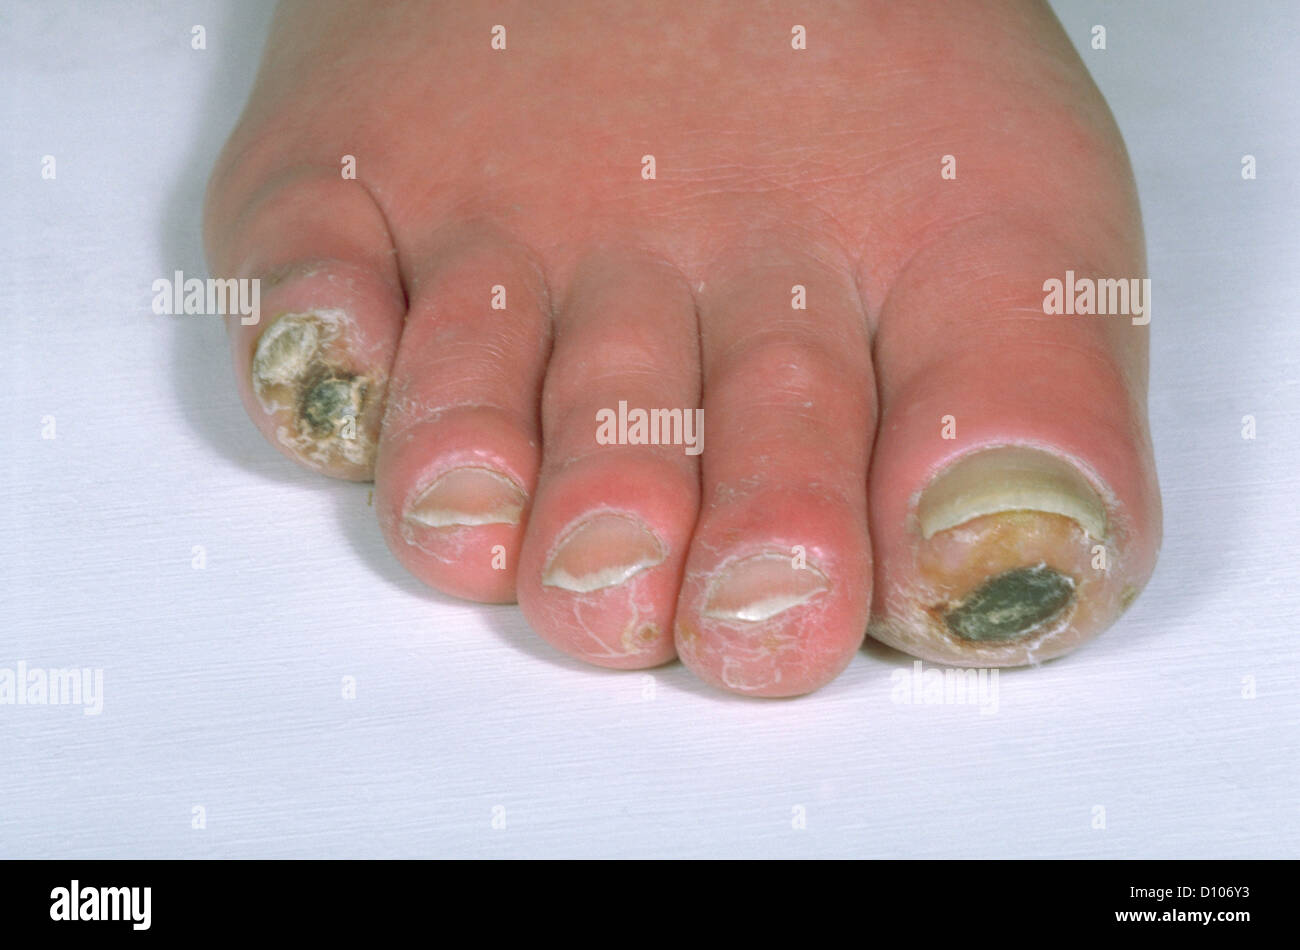 ISCHAEMIC ULCERS ON THE TOES Stock Photo